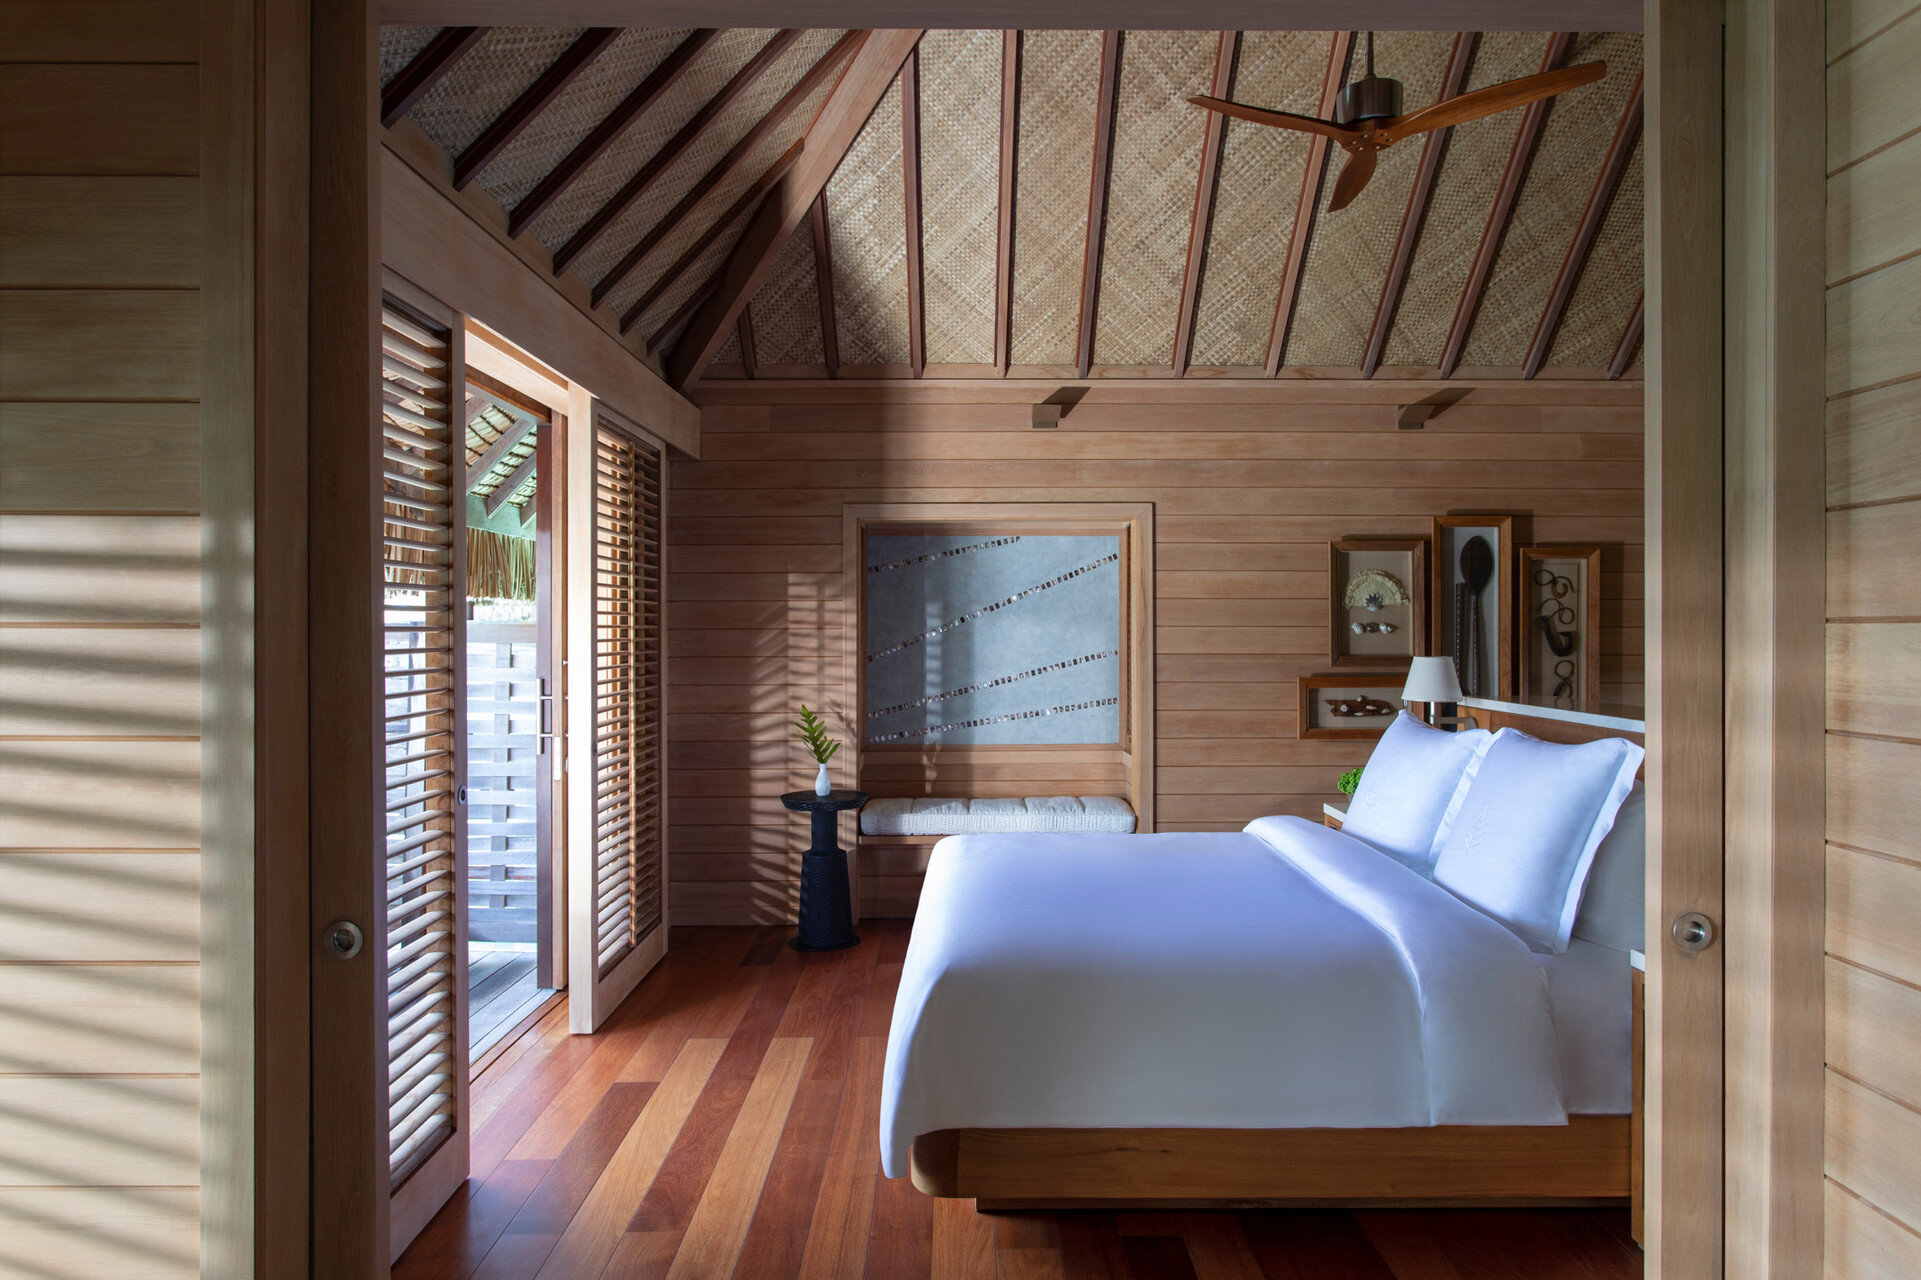   A bedroom in an over-water bungalow (photo credit: Four Seasons Hotels &amp; Resorts)  